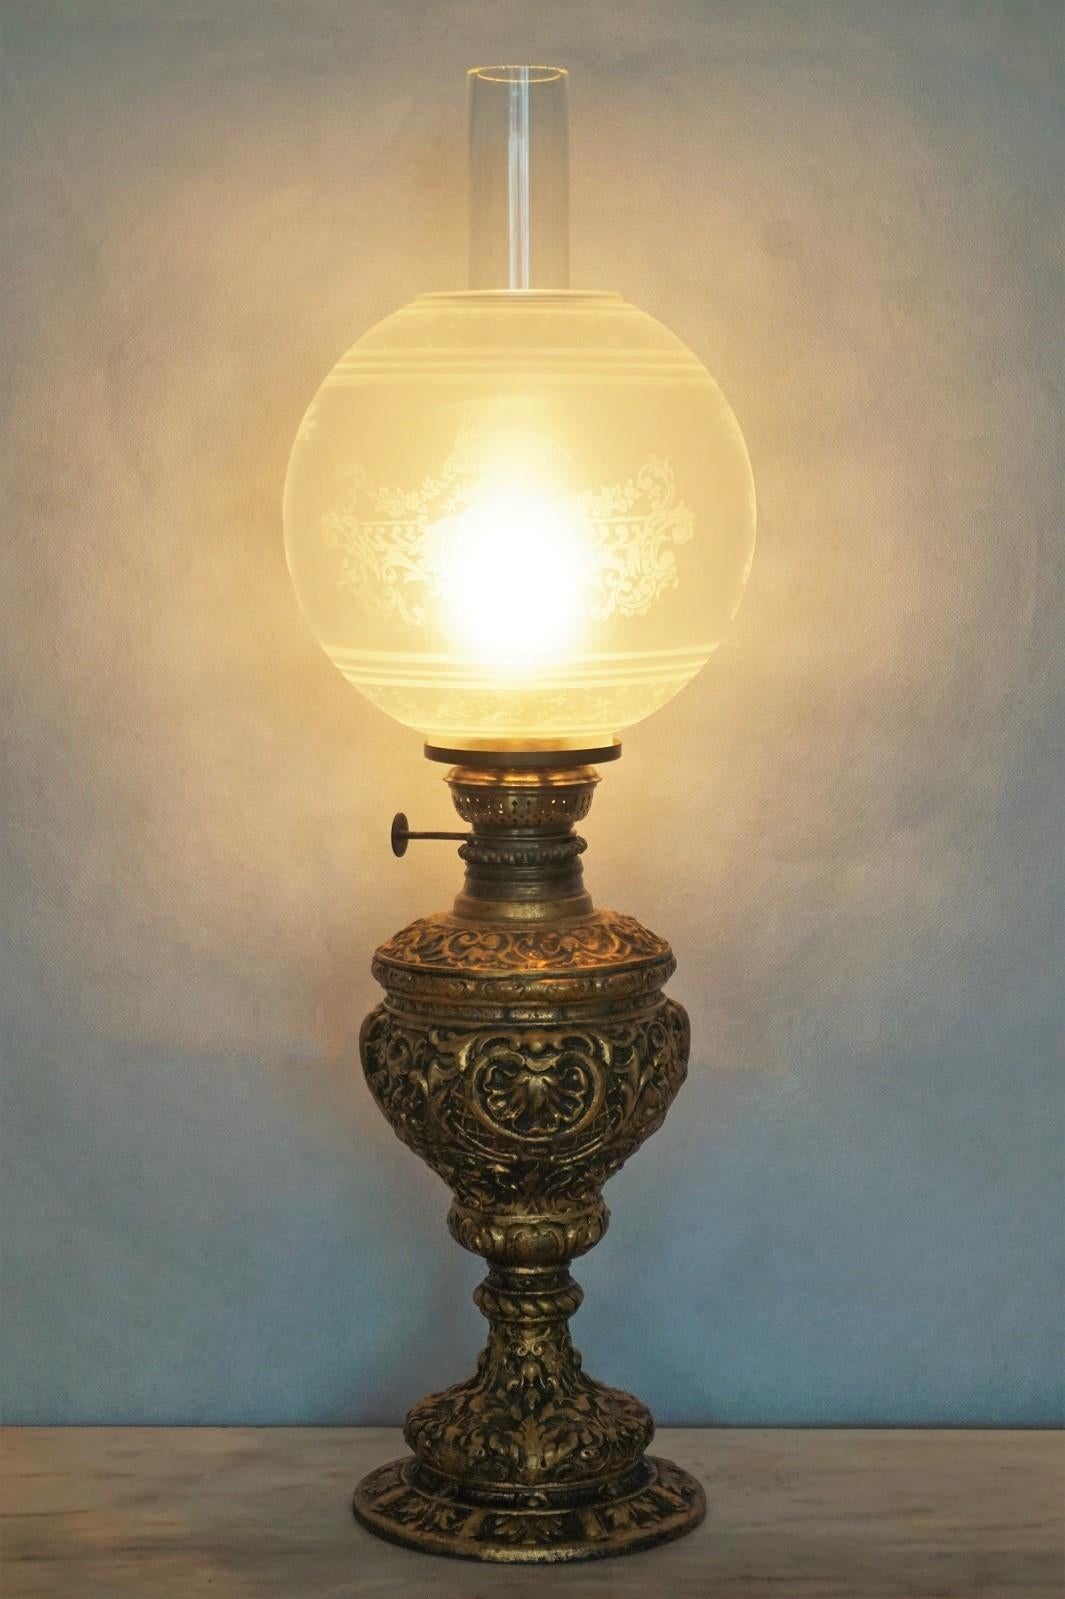 Victorian style heavy cast gilt bronze oil lamp converted to electric table lamp, etched glass globe and clear glass chimney, France, 1880-1890. This oil lamp has been converted to electric in the 1930s.
One E14 light bulb socket.
Measures: Height